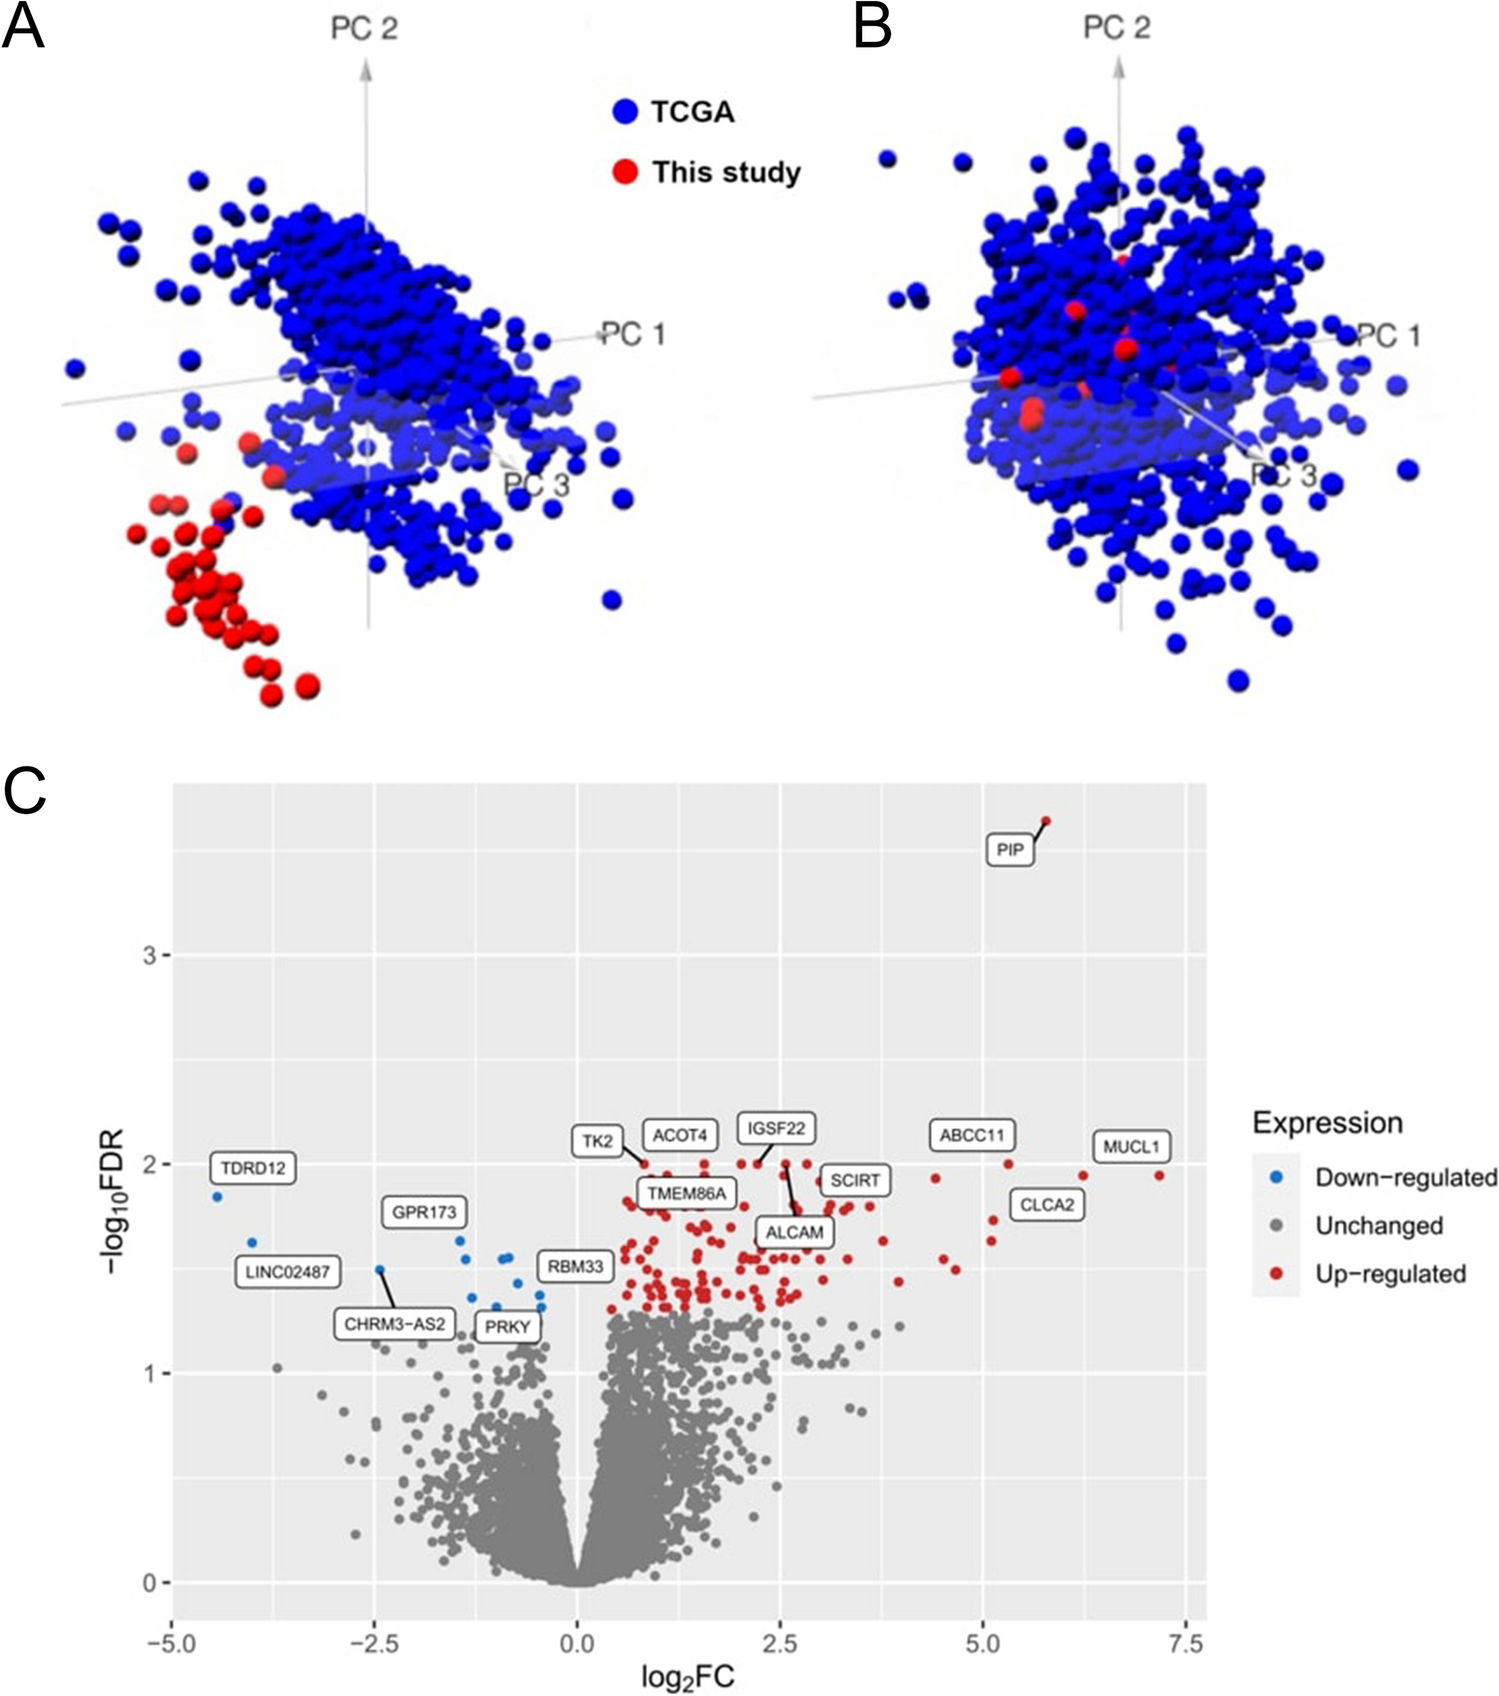 The analysis of transcriptomic signature of TNBC—searching for the potential RNA-based predictive biomarkers to determine the chemotherapy sensitivity